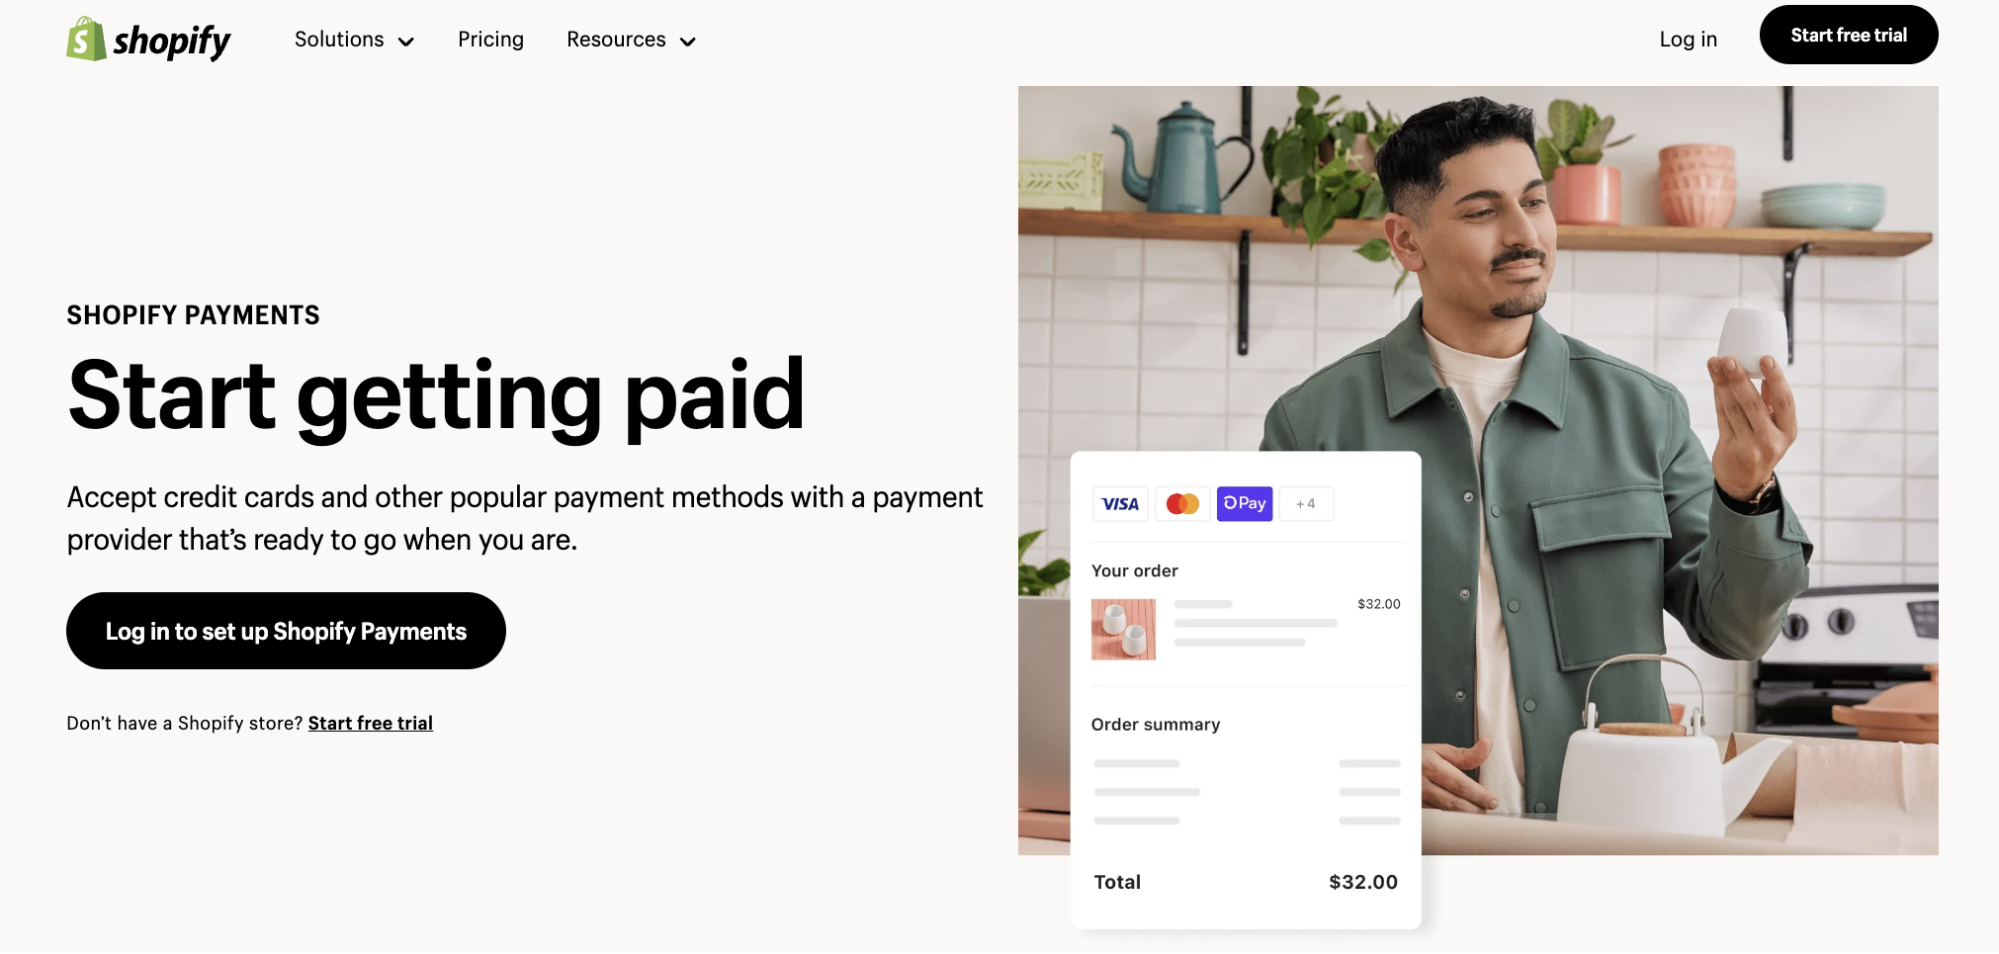 A Shopify landing page with basic information about Shopify Payments